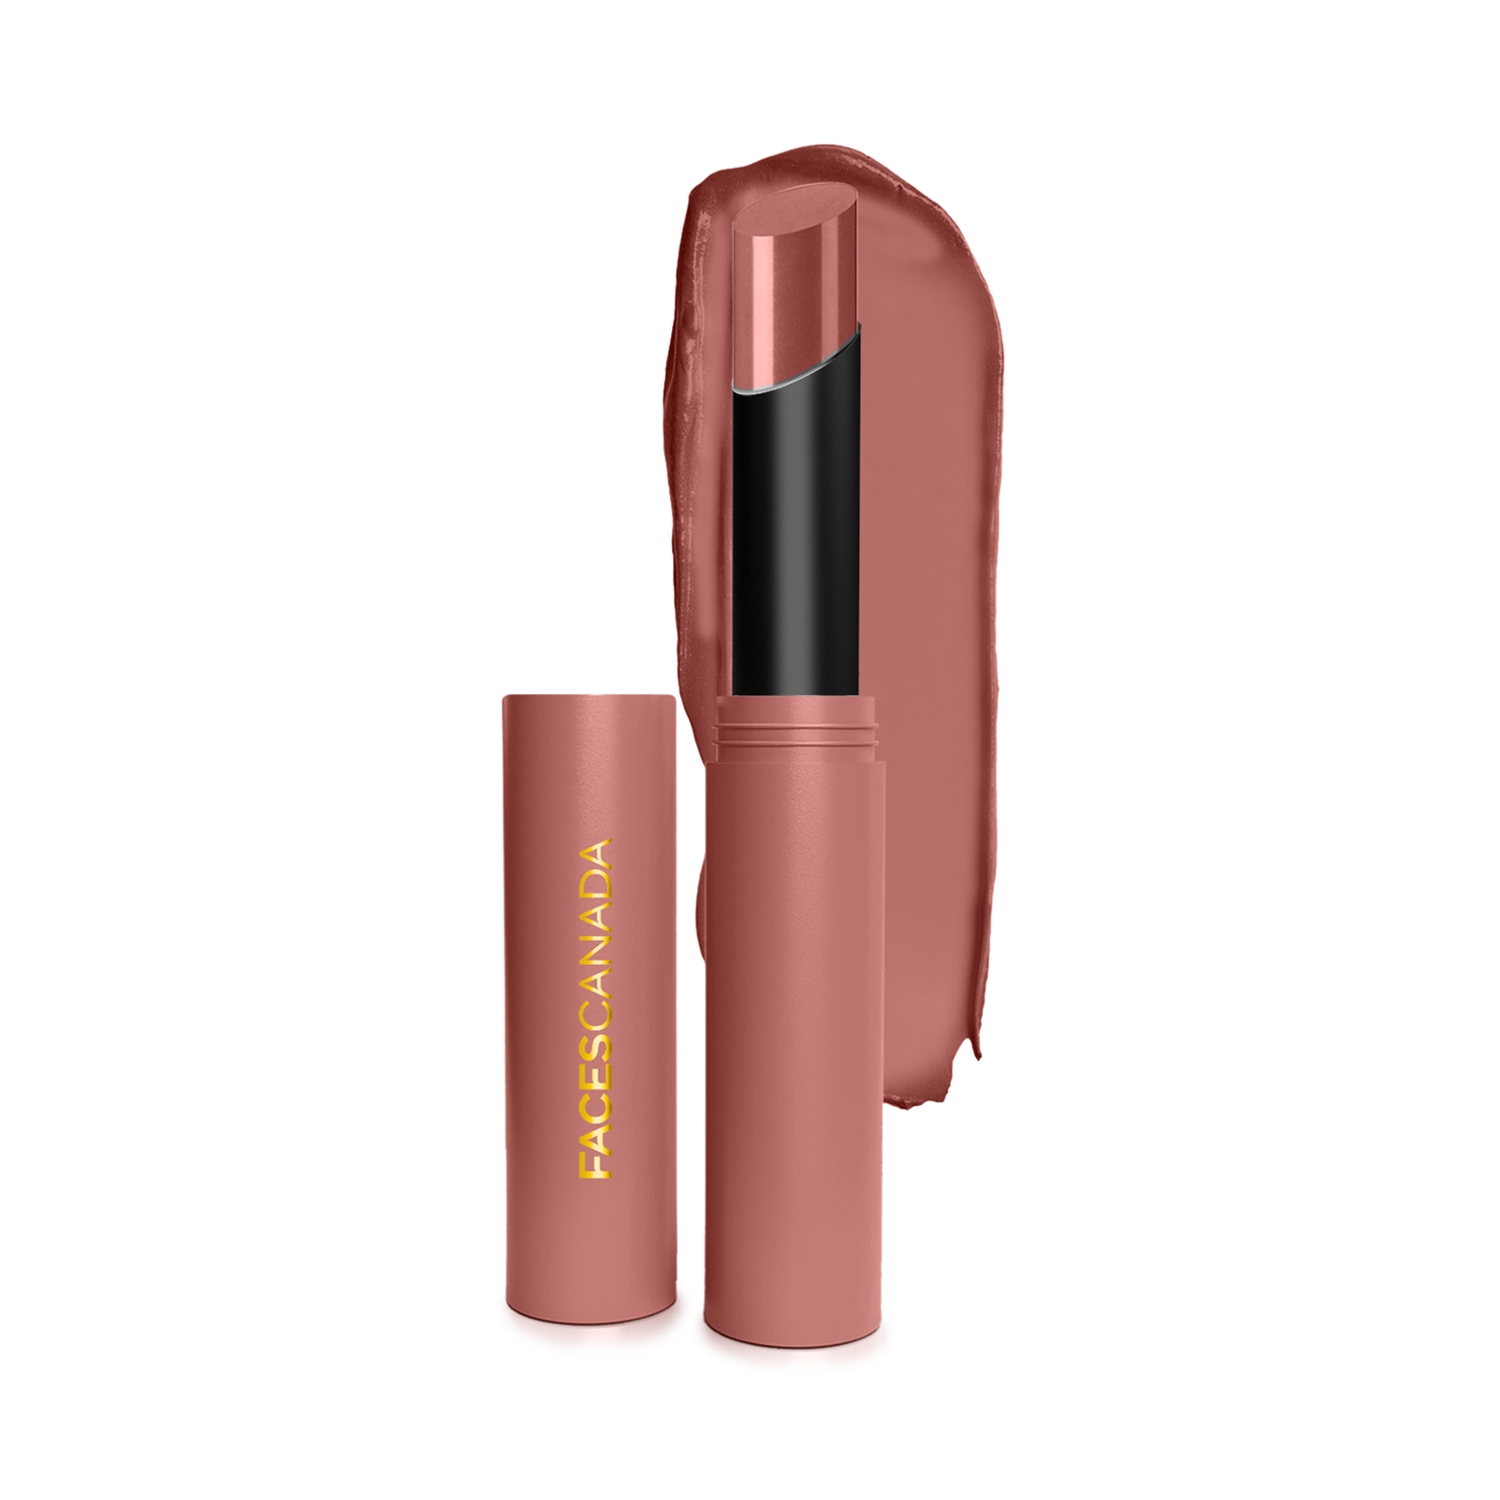 Faces Canada | Faces Canada 3-In-1 Long Stay Matte Lipstick - 03 Kiss Ready Nude (2g)